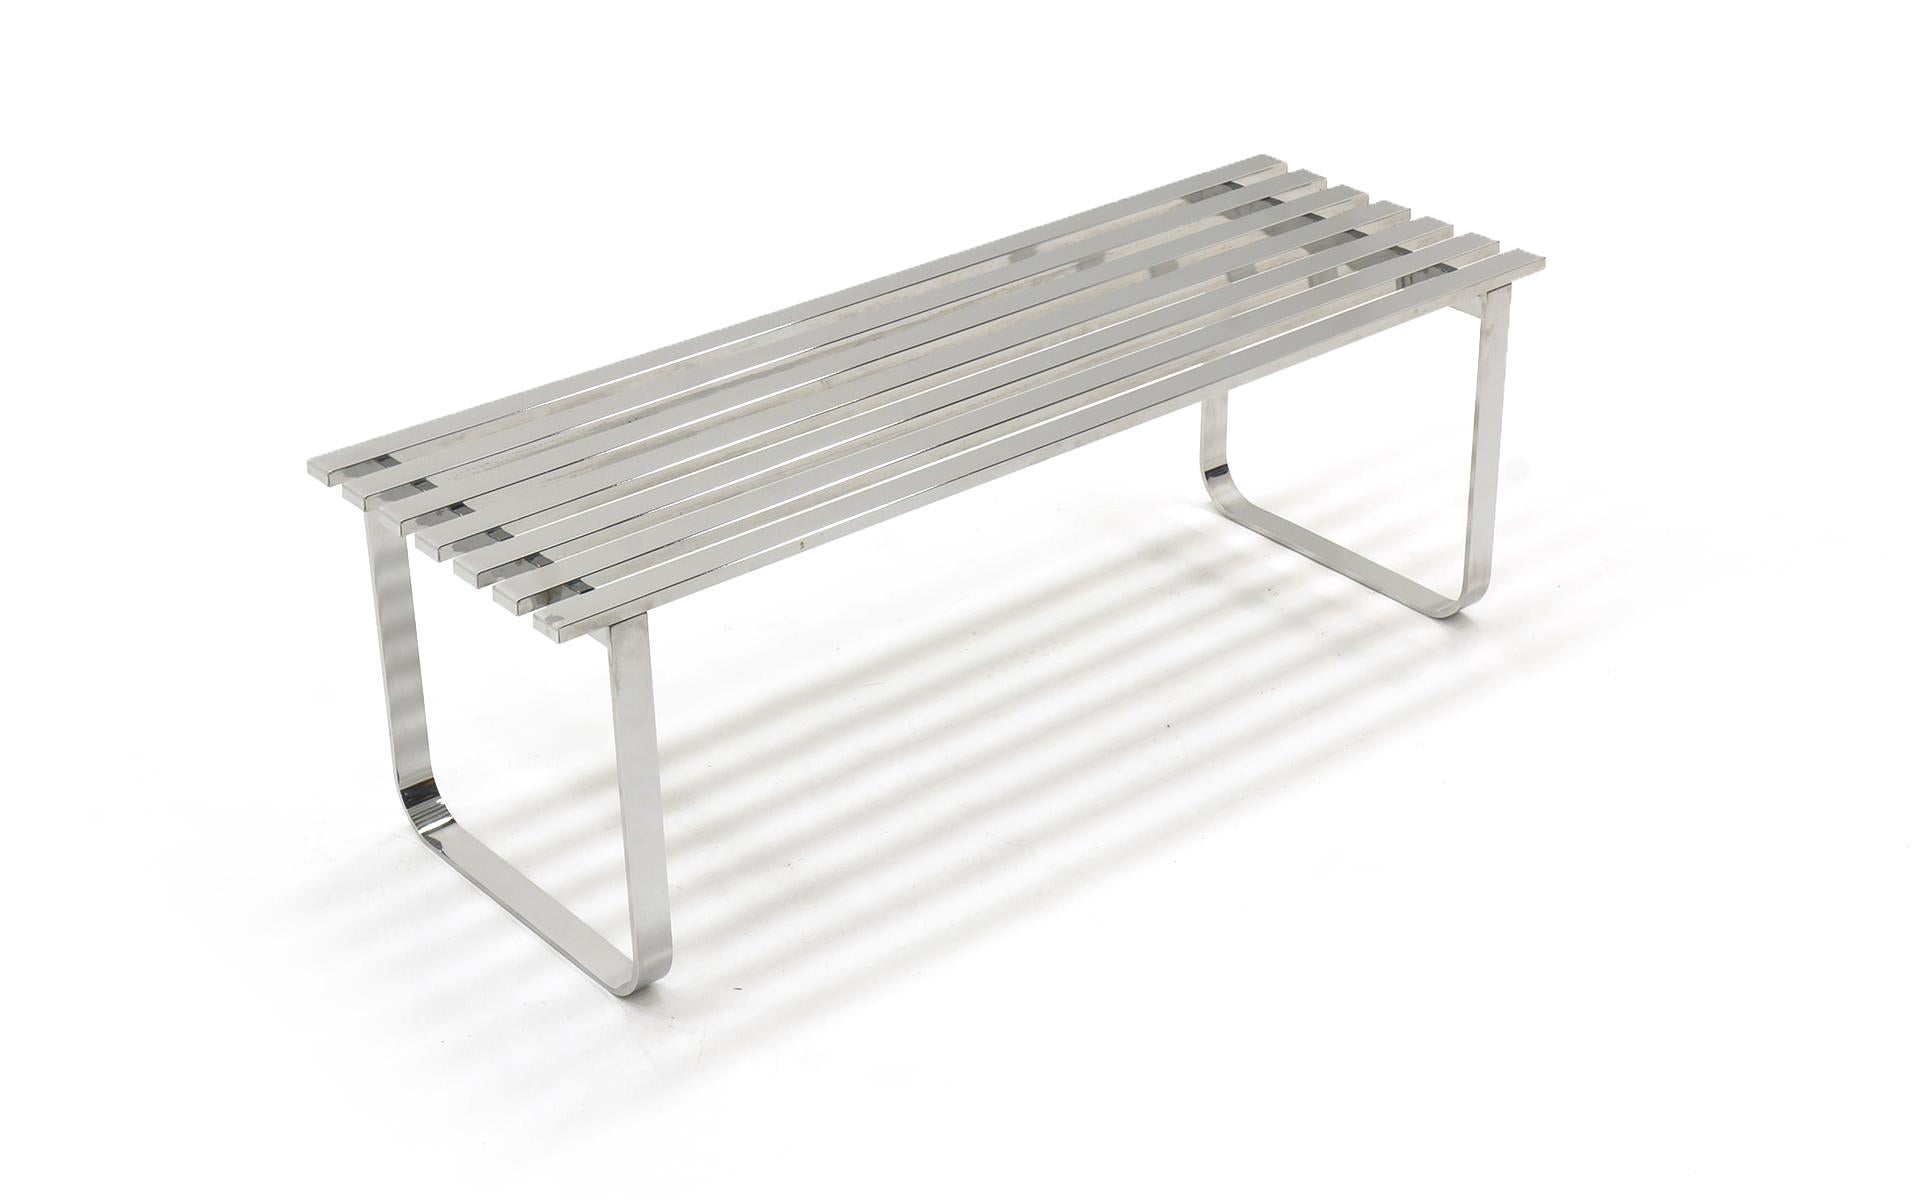 48 inch slat bench in chromed steel by Milo Baughman. Also makes an excellent coffee table. Minor surface scratches. Ready to use.